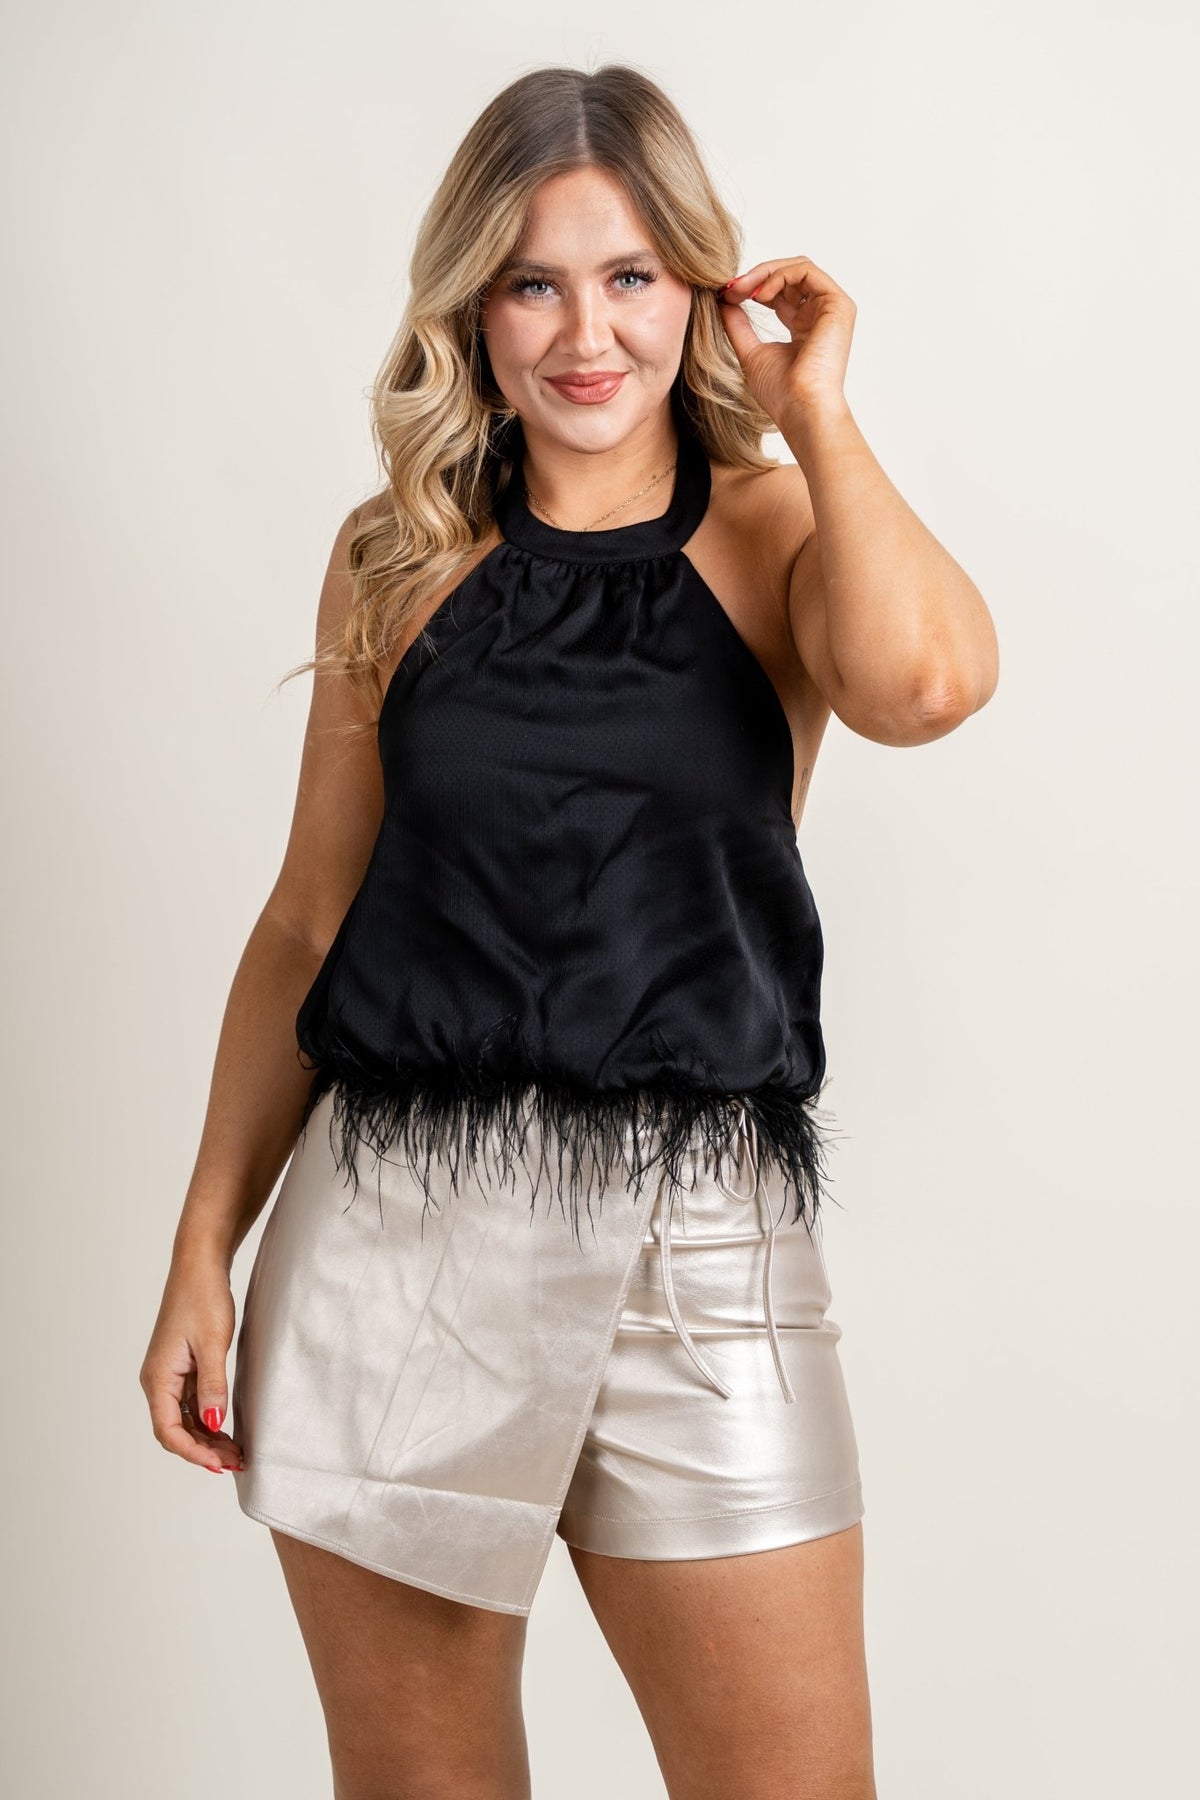 Feather trim halter top black - Trendy New Year's Eve Outfits at Lush Fashion Lounge Boutique in Oklahoma City